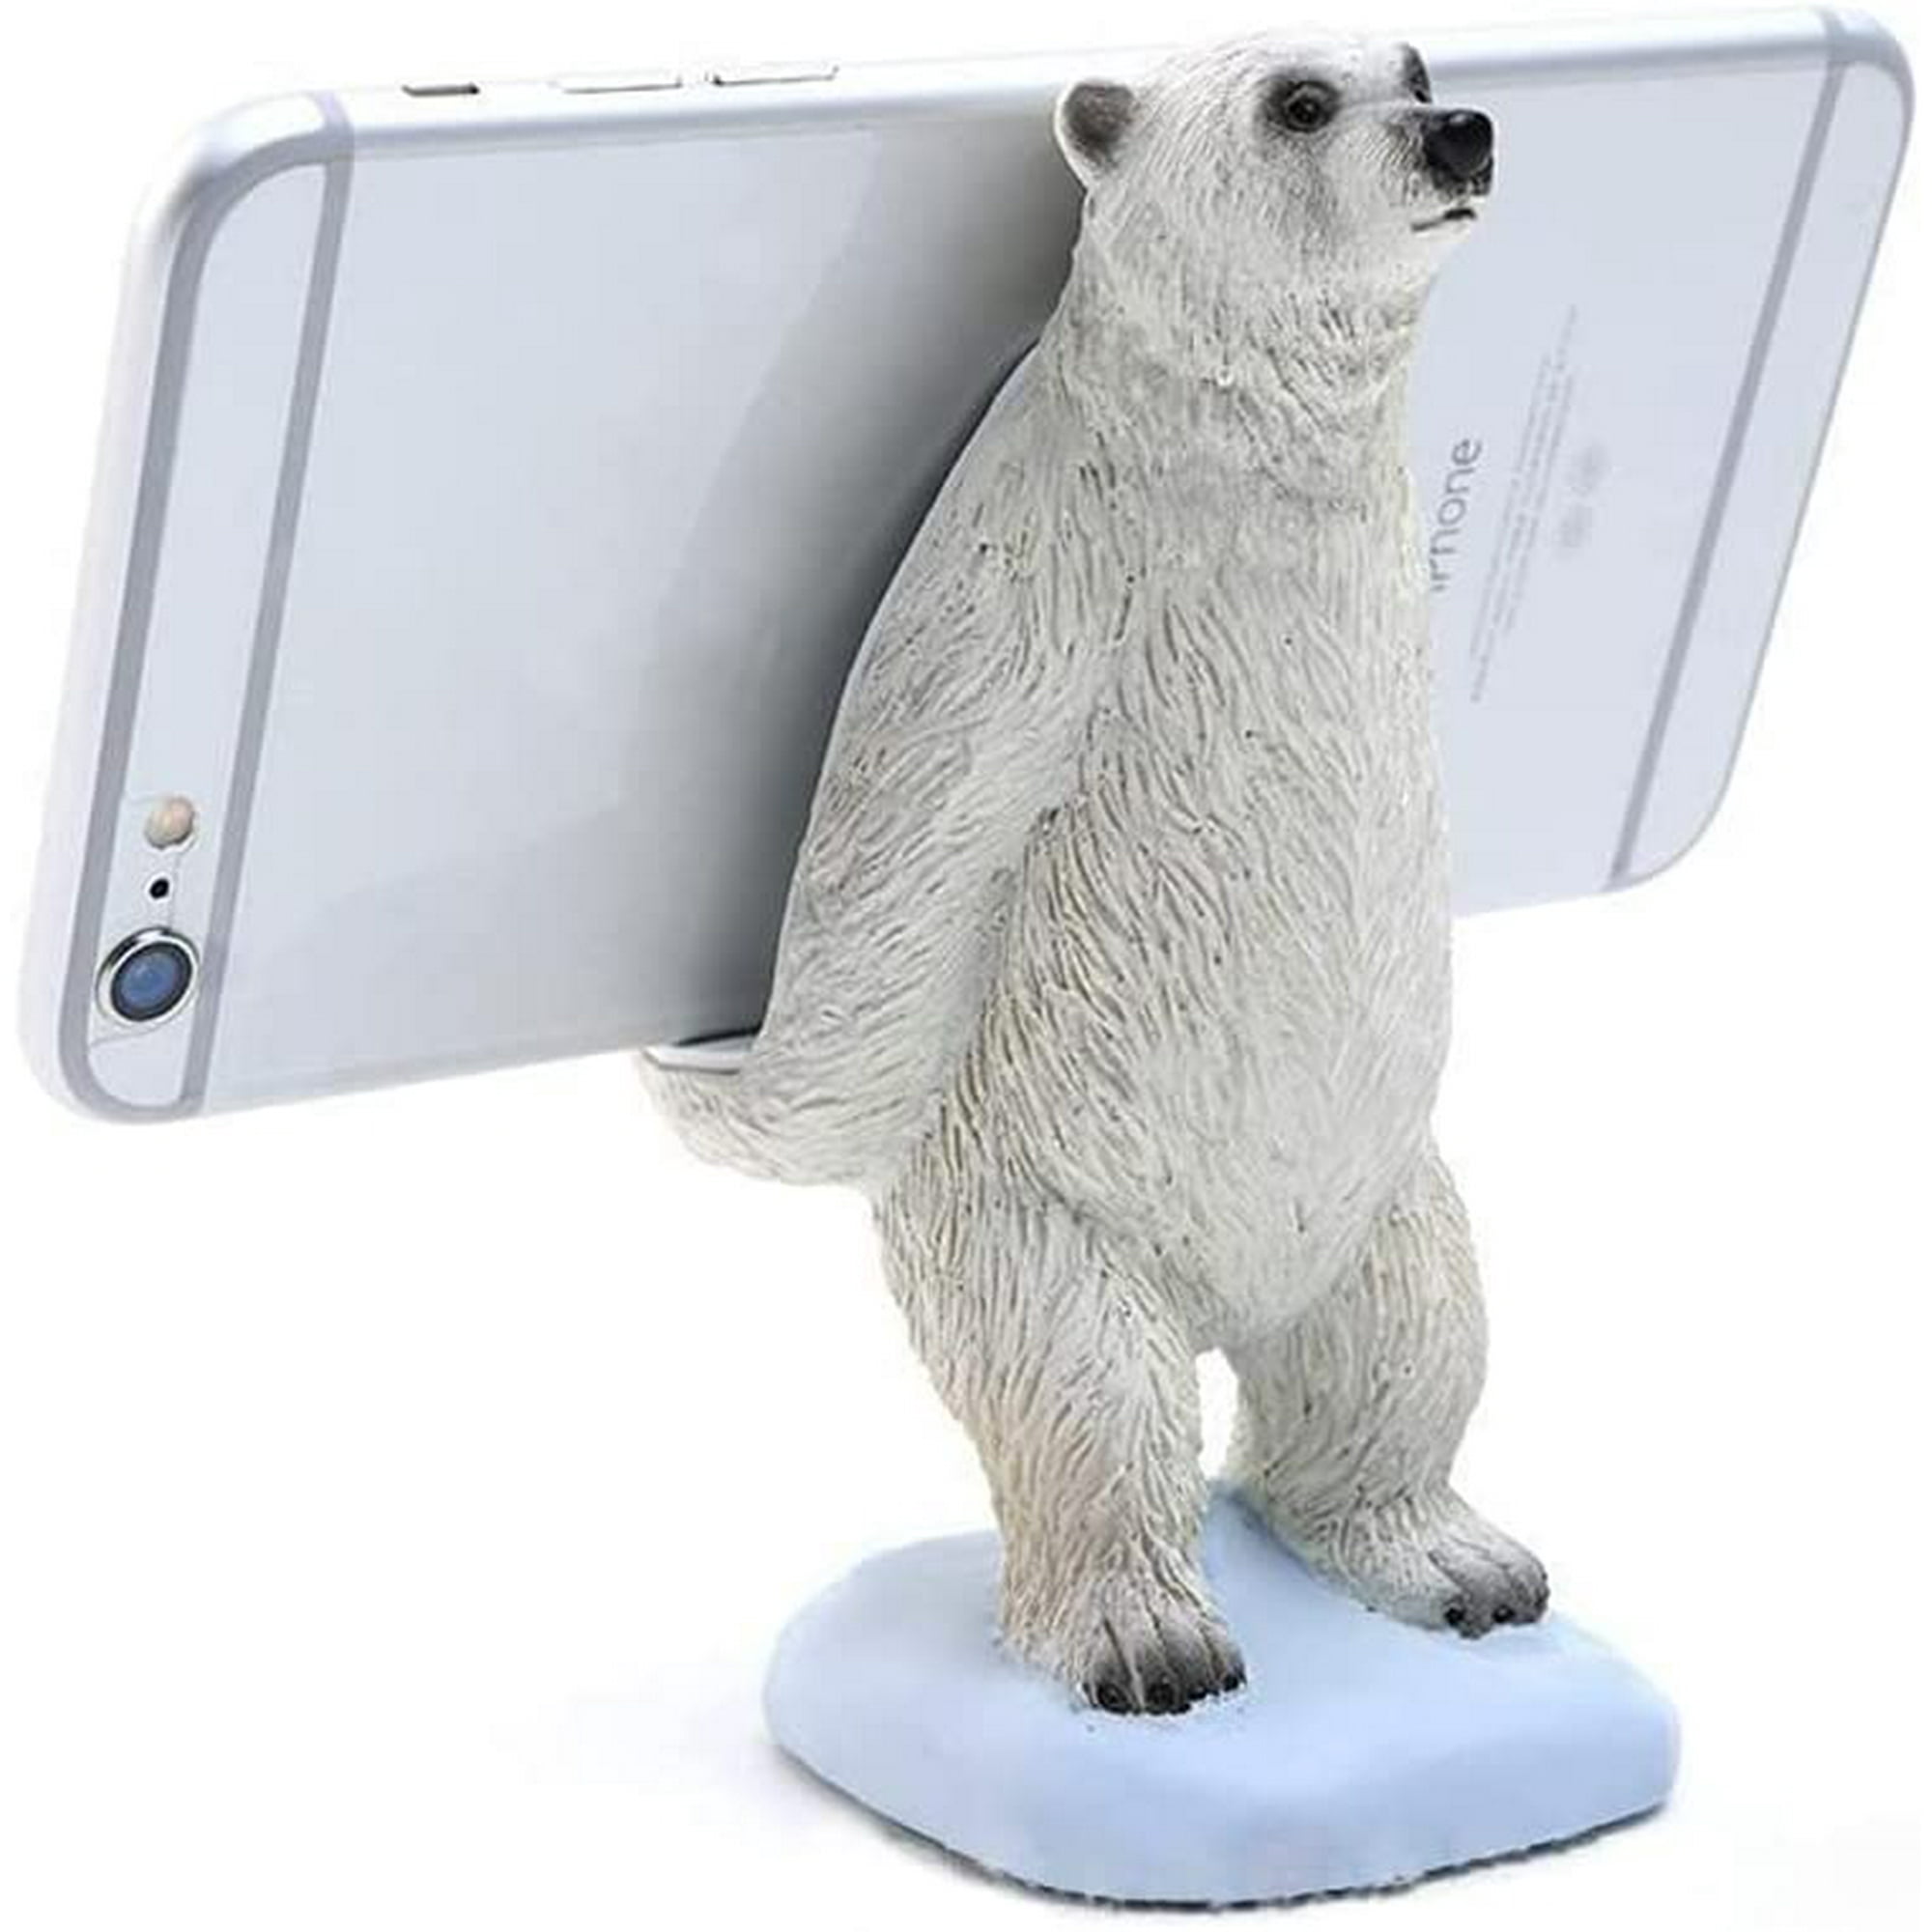 SHTUUYINGG Polar Bear Phone Stand for Desk, Cute Animal Smartphone Mount  Holder for iPhone 13/12/Max/iPad, Samsung, Huawei, Mobile Phone Holder Desk  Decorations | Walmart Canada